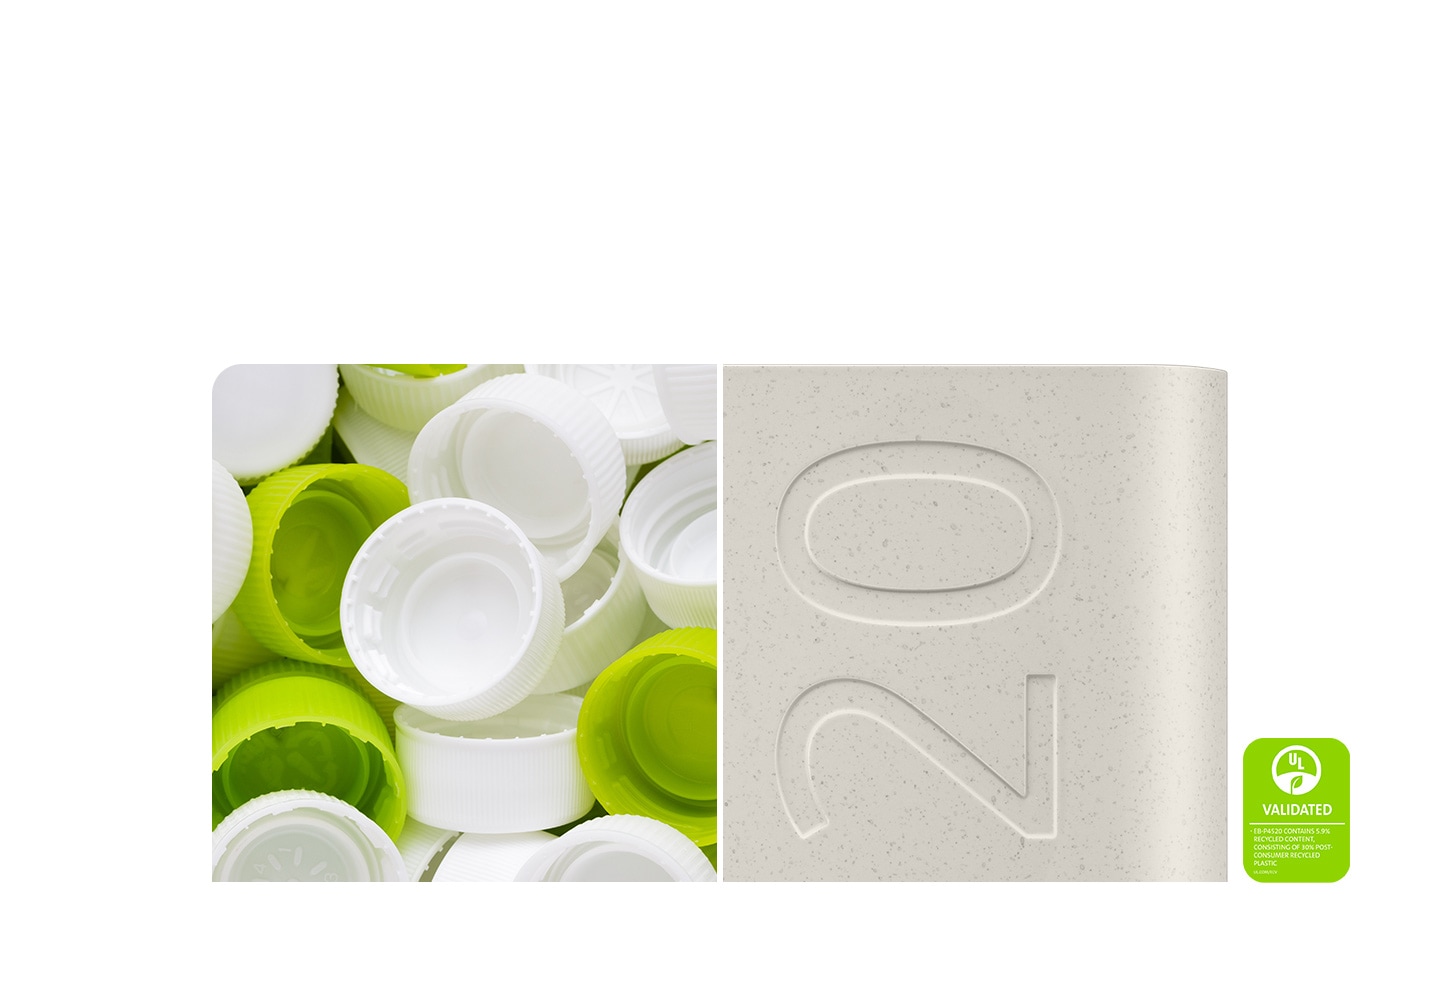 With left side showing a pile of white and green plastic bottle caps and the right side displaying a close-up of a grey battery pack with a prominent embossed ’20’. A 'UL Validated' badge indicates the product has been certified for EB-P4520 contains 5.9% recycled content, consisting of 30% post-consumer recycled plastic.